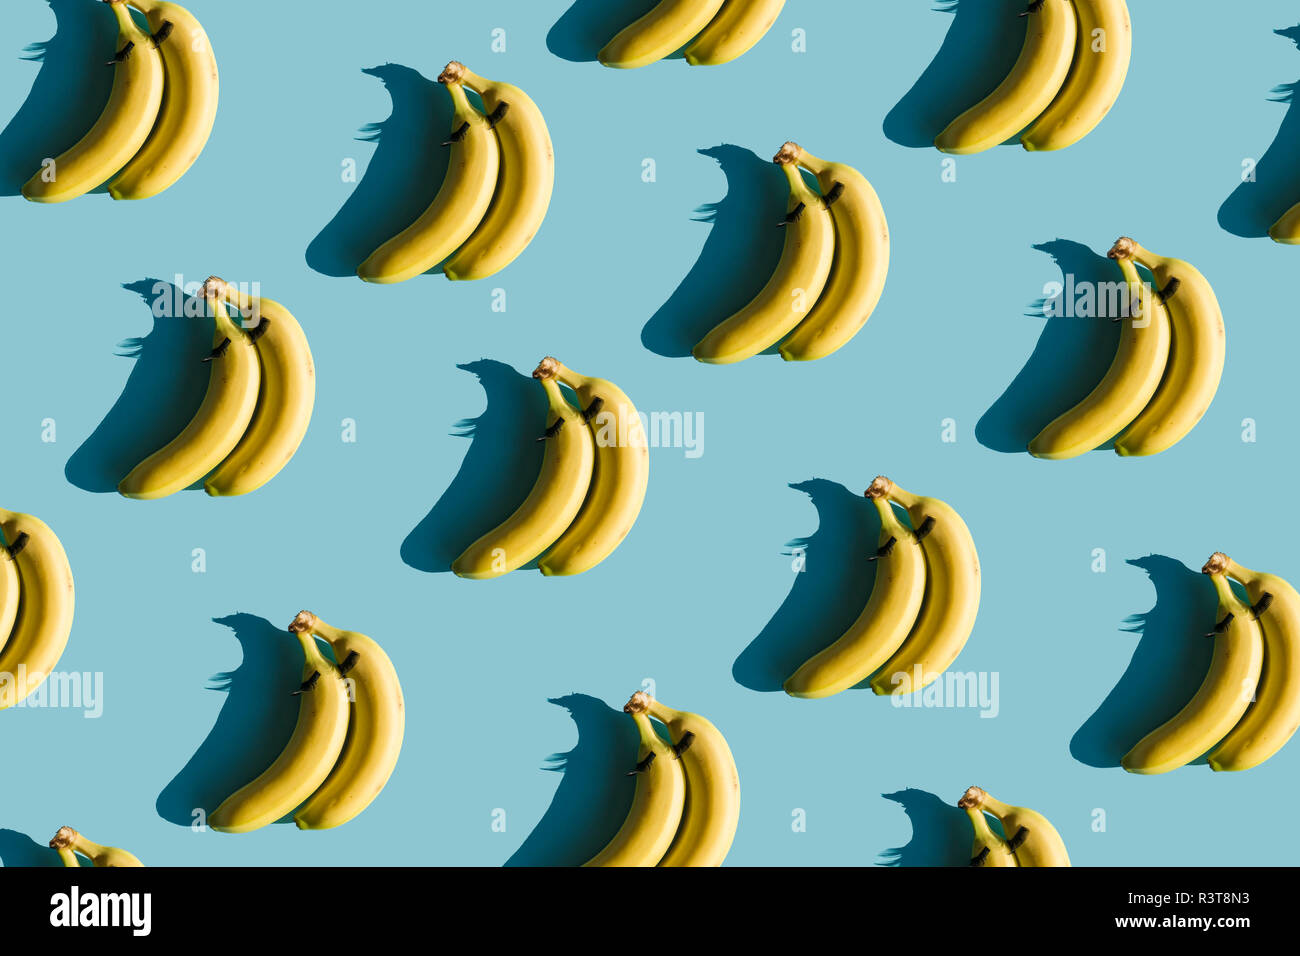 3D Rendering, bananas with fake eyelashes and a couple backwards composition Stock Photo